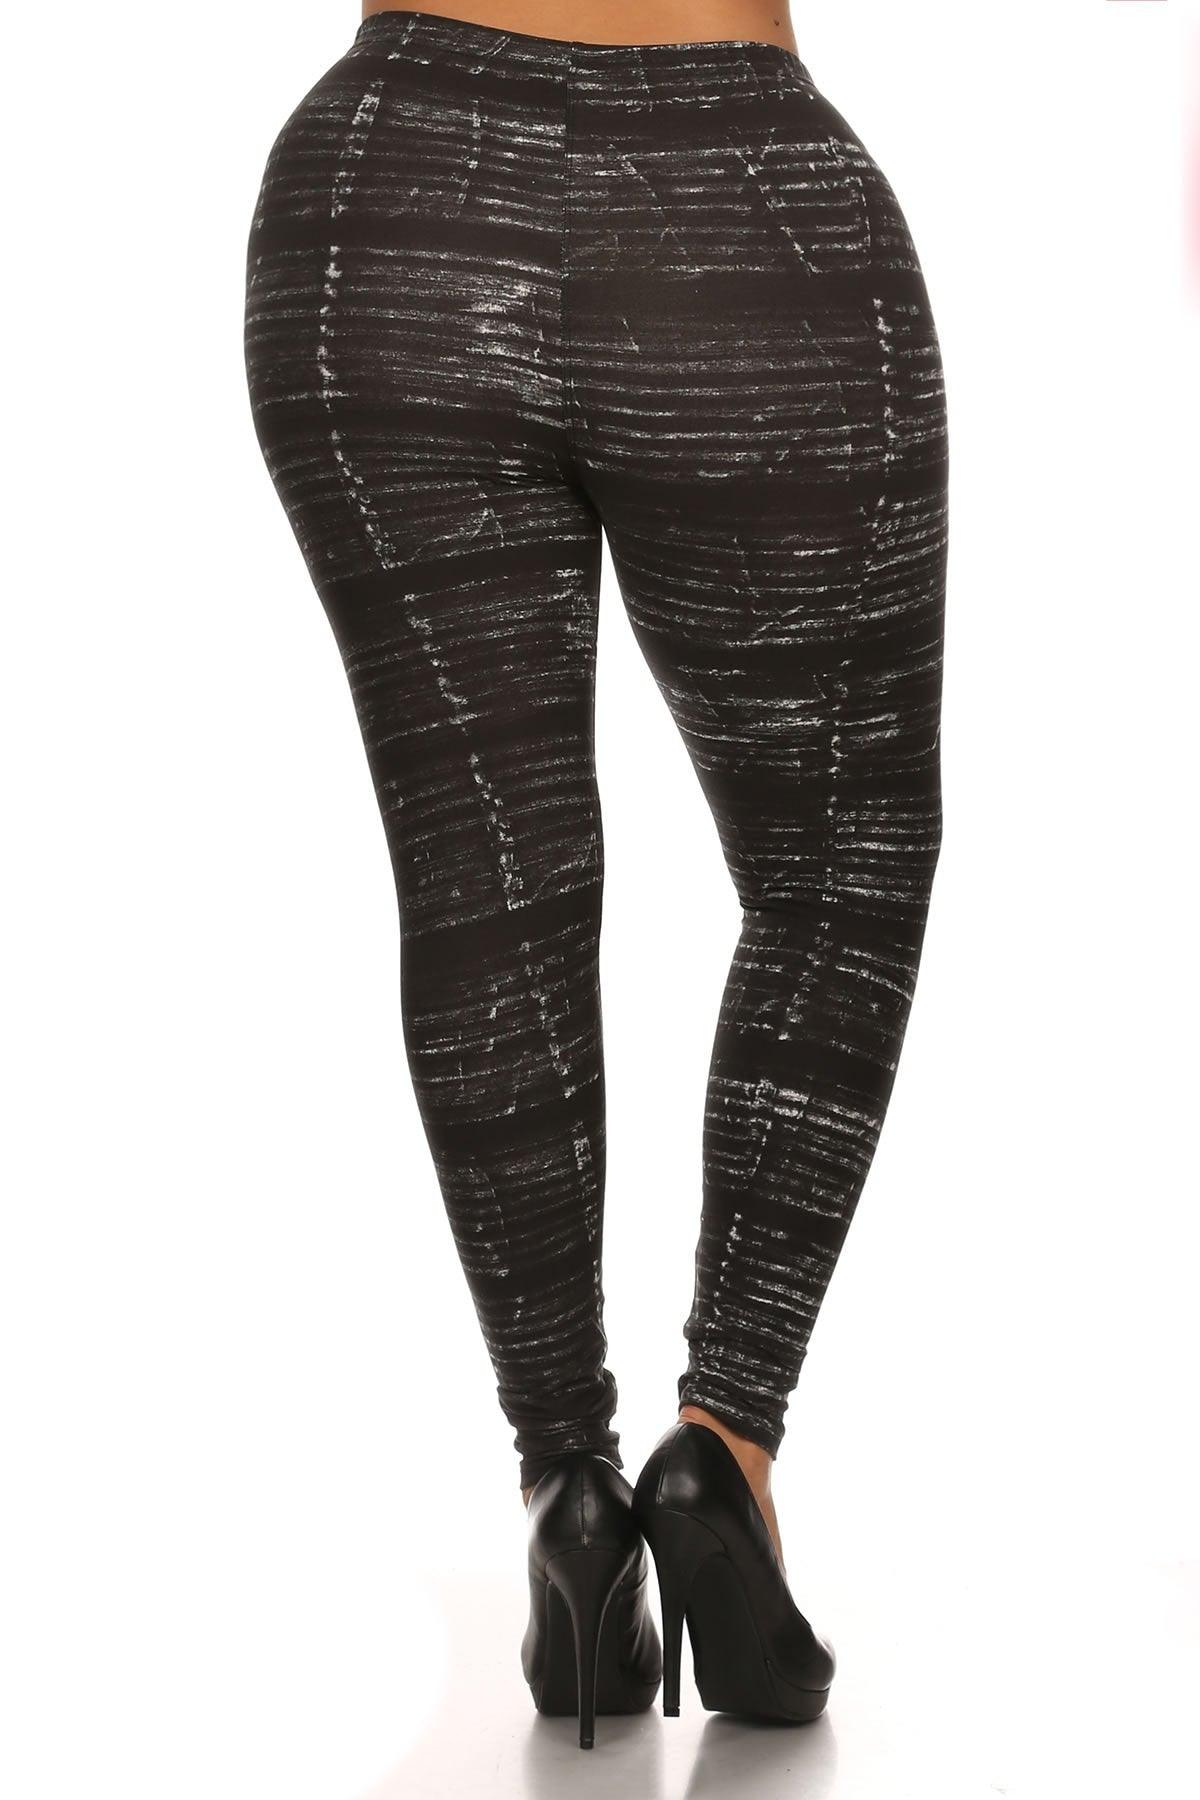 Plus Size Tie Dye Print, Full Length Leggings In A Fitted Style With A Banded High Waist. - Kreative Passions